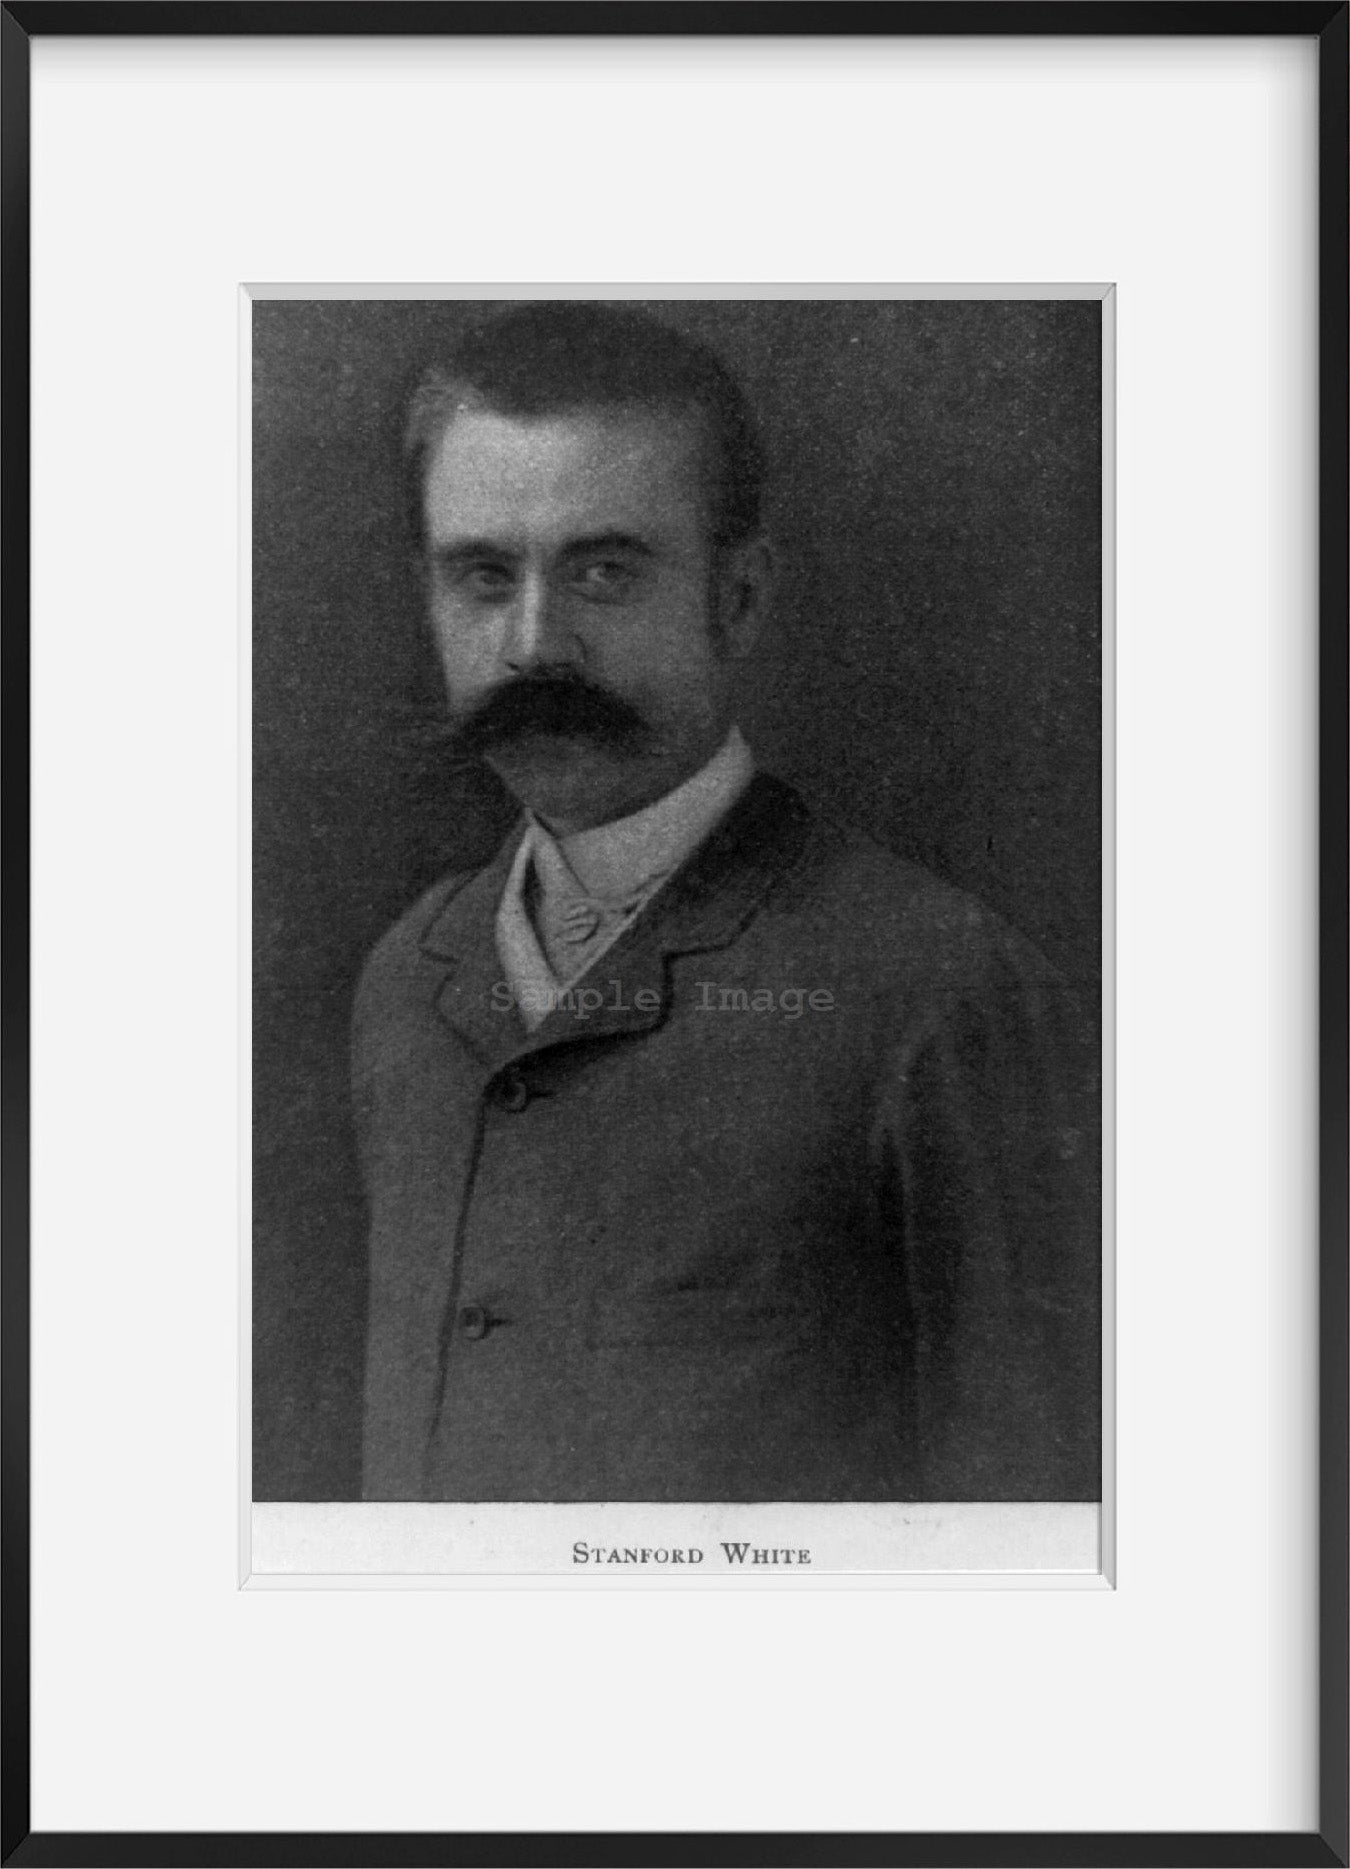 1895 photograph of Stanford White, 1853-1906 Summary: Half lgth., facing left.